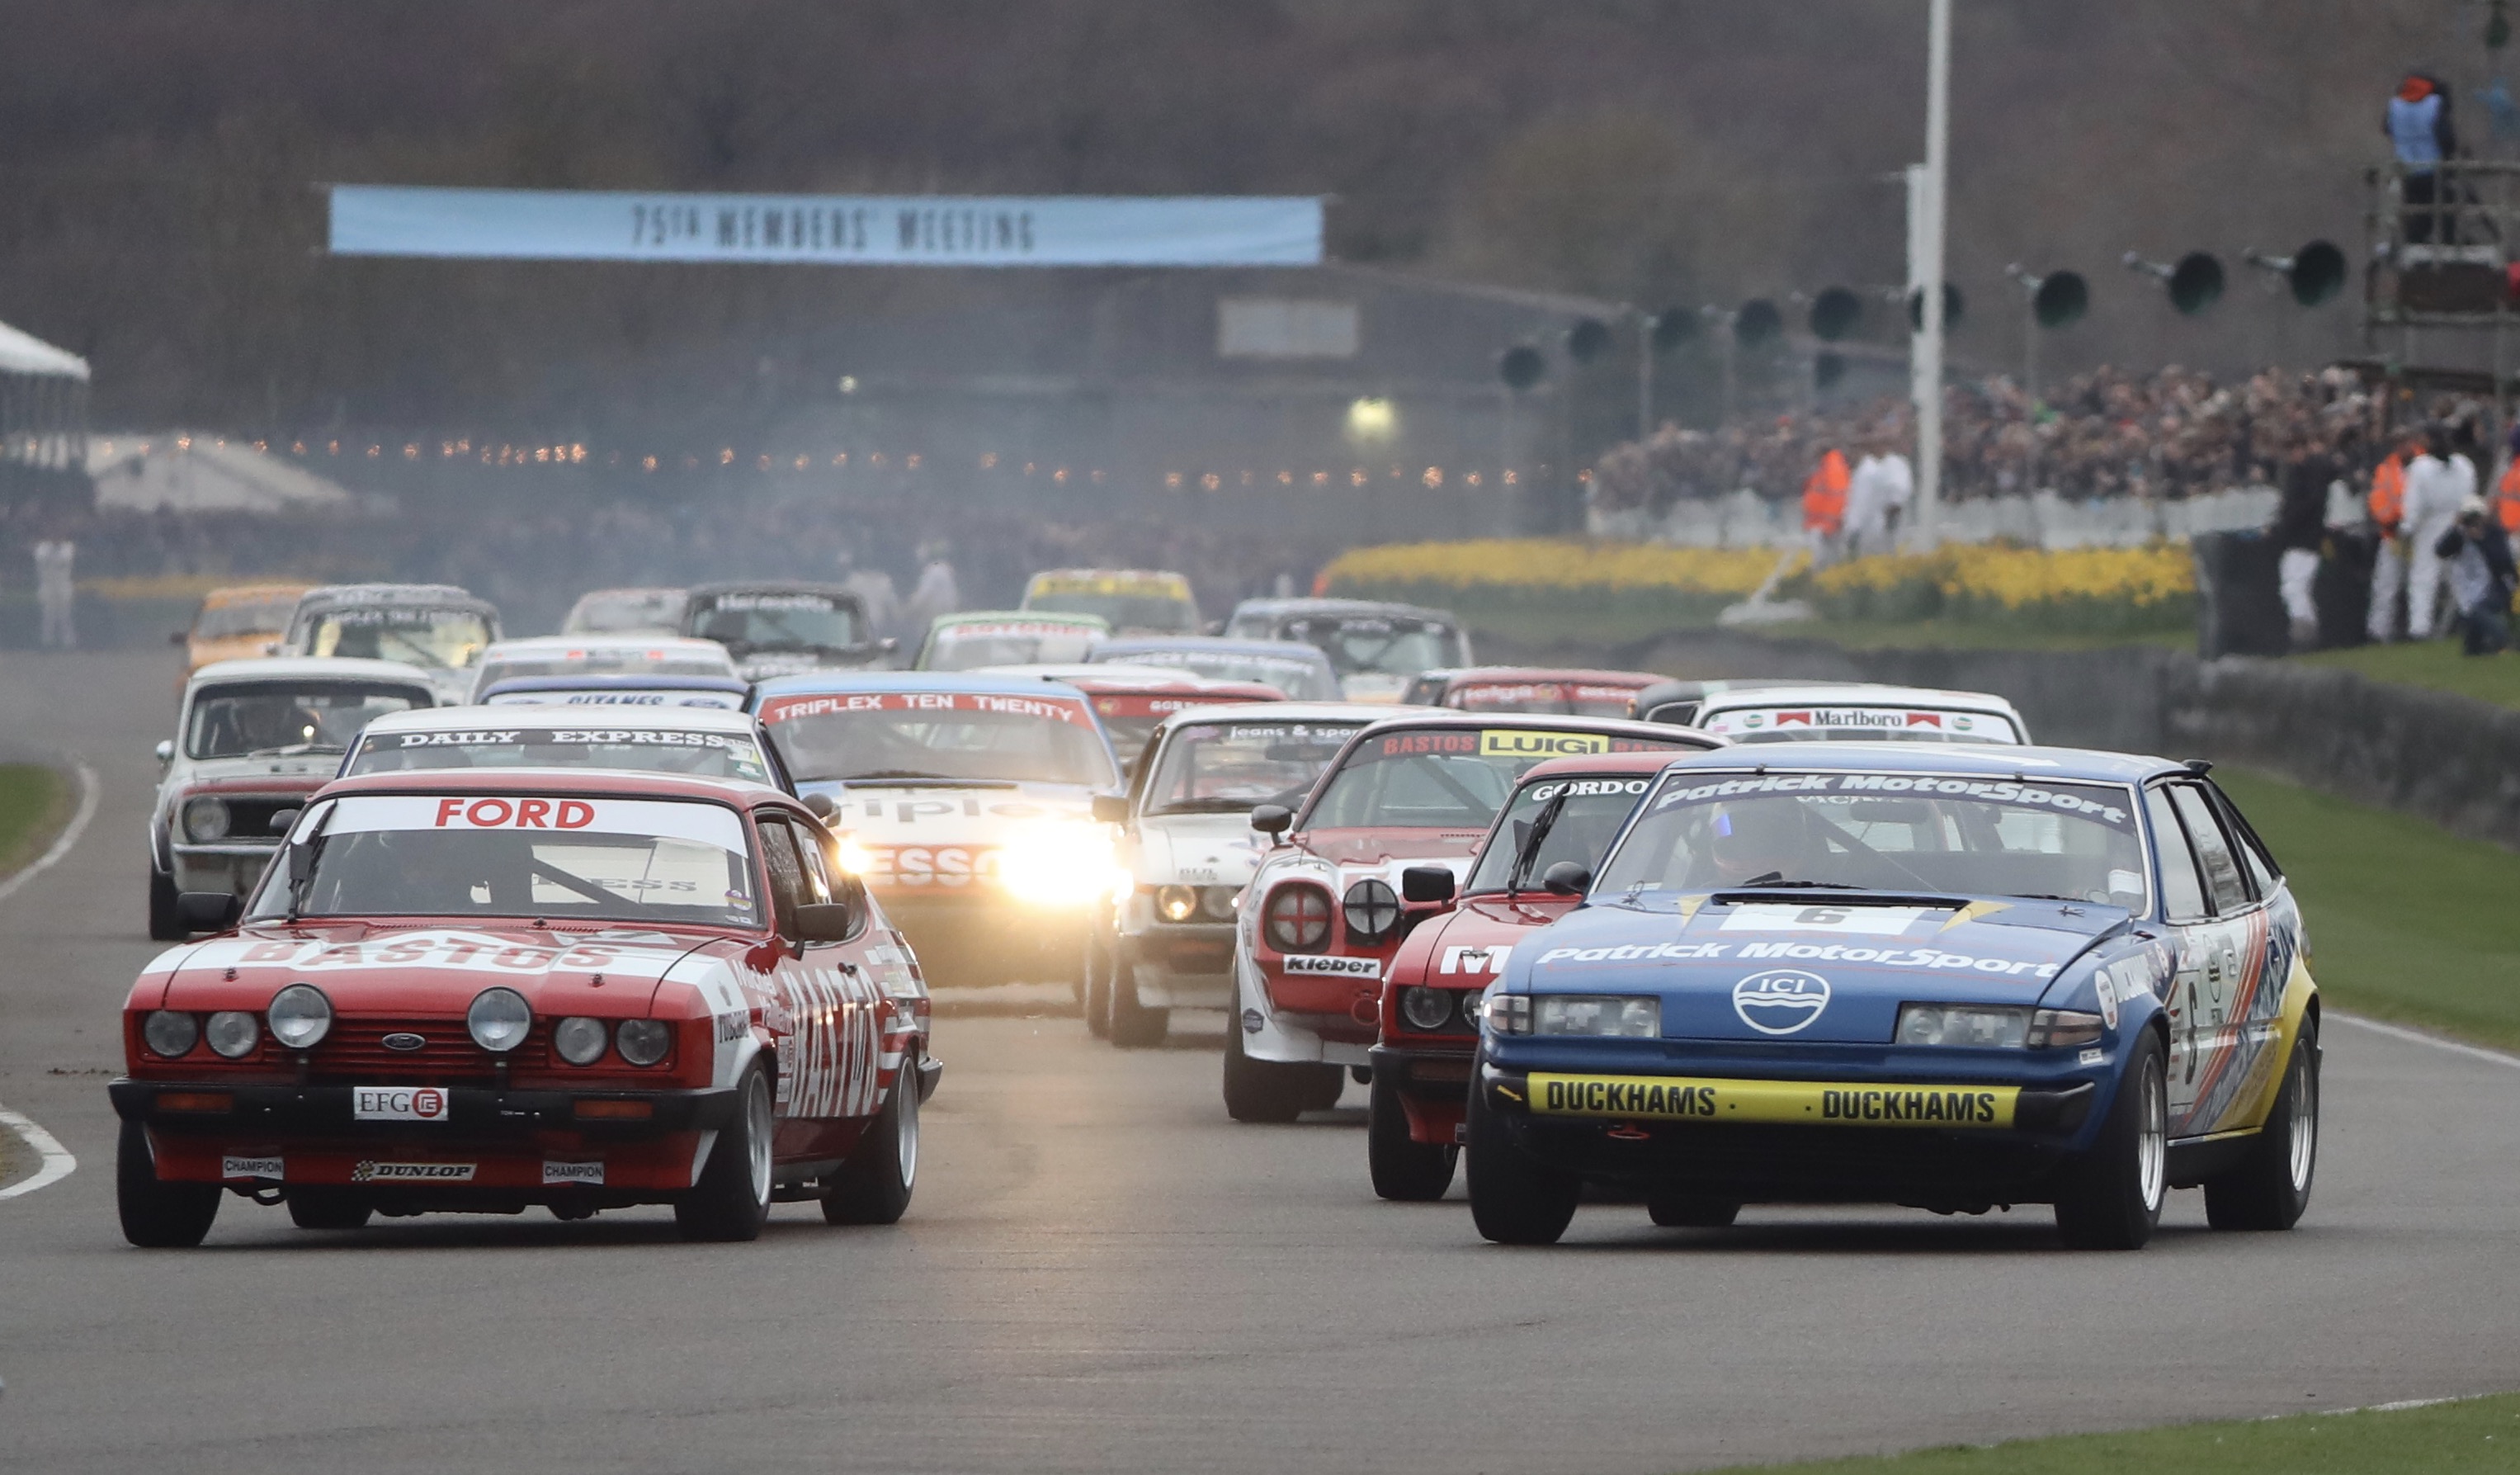 The JD Classics Patrick Motorsport Rover SD1 got away to a flying start during the Gerry Marshall Trophy race